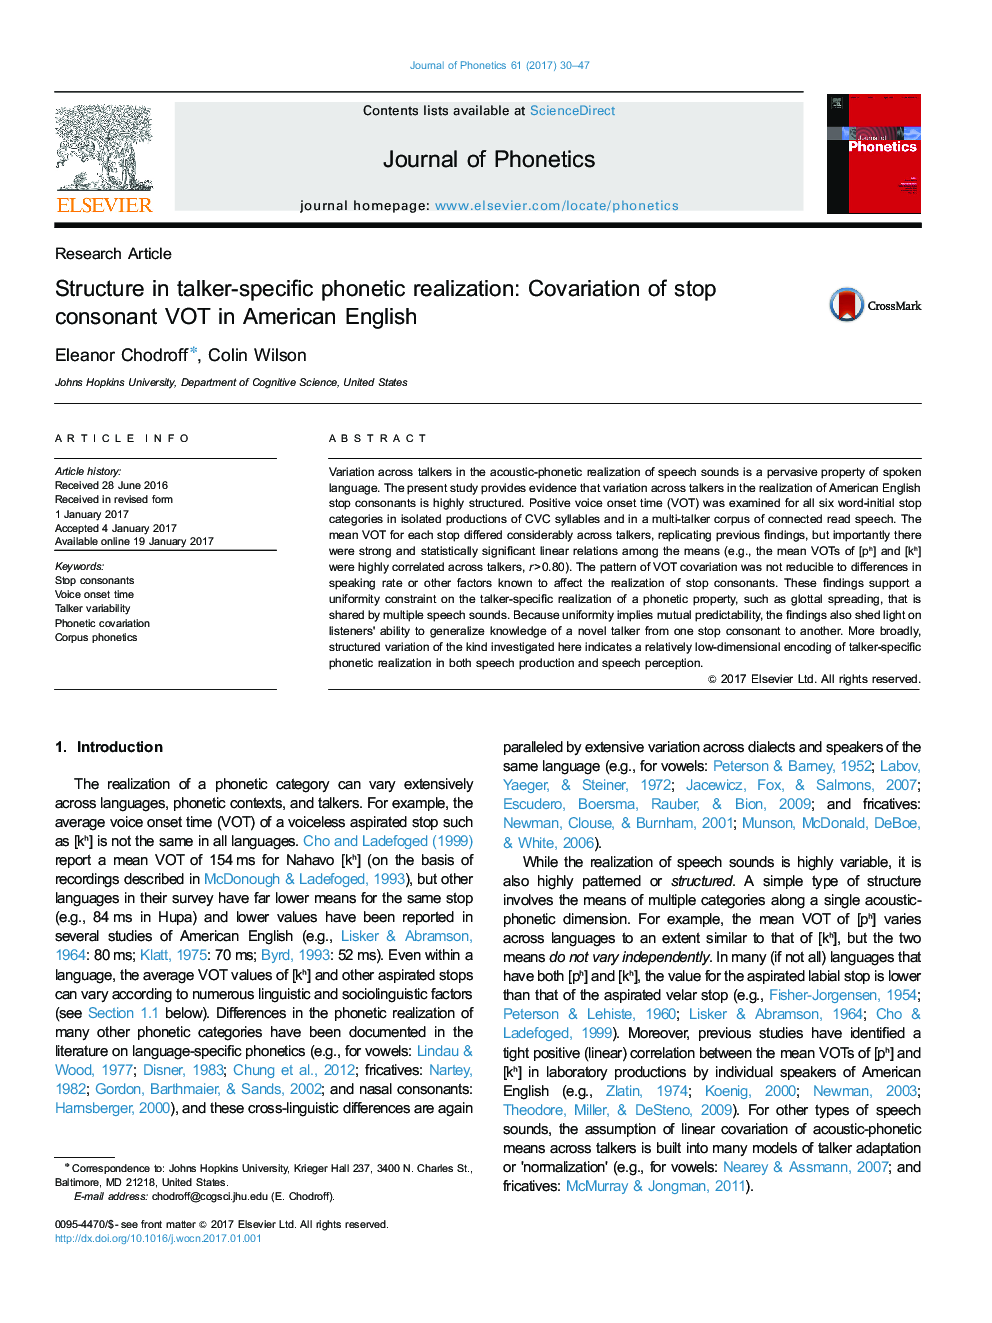 Structure in talker-specific phonetic realization: Covariation of stop consonant VOT in American English